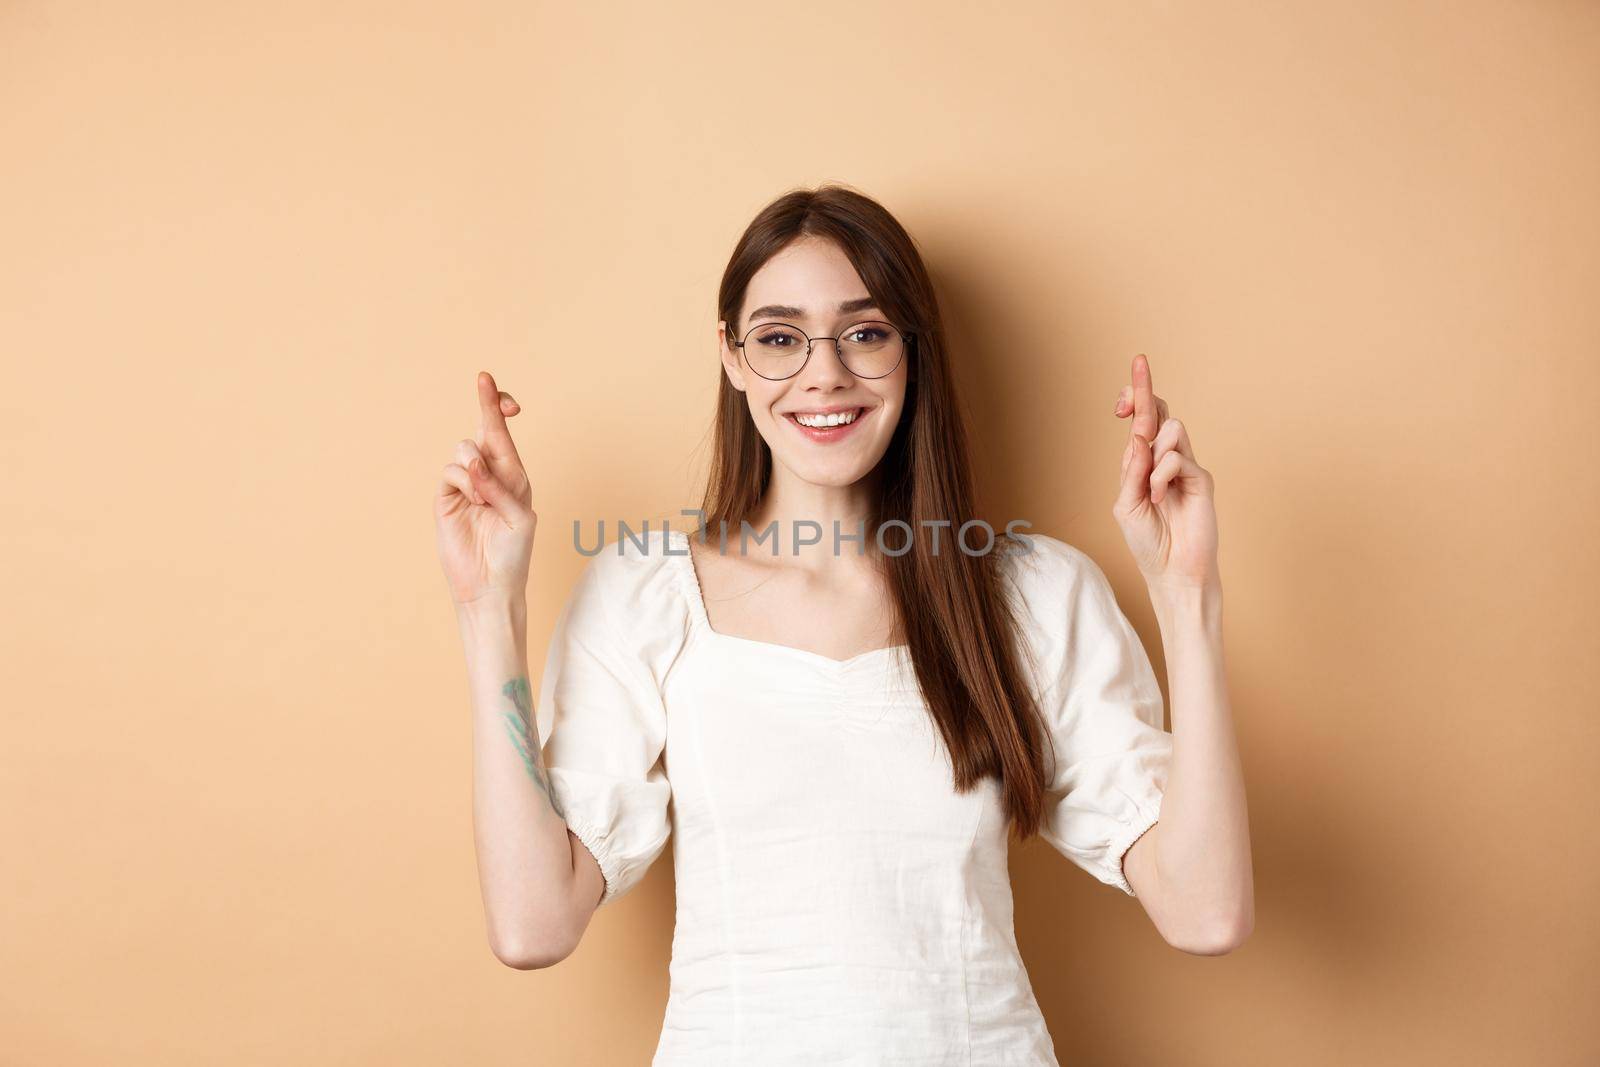 Hopeful smiling girl making wish, cross fingers for good luck and looking happy, praying for dream to come true, standing on beige background.